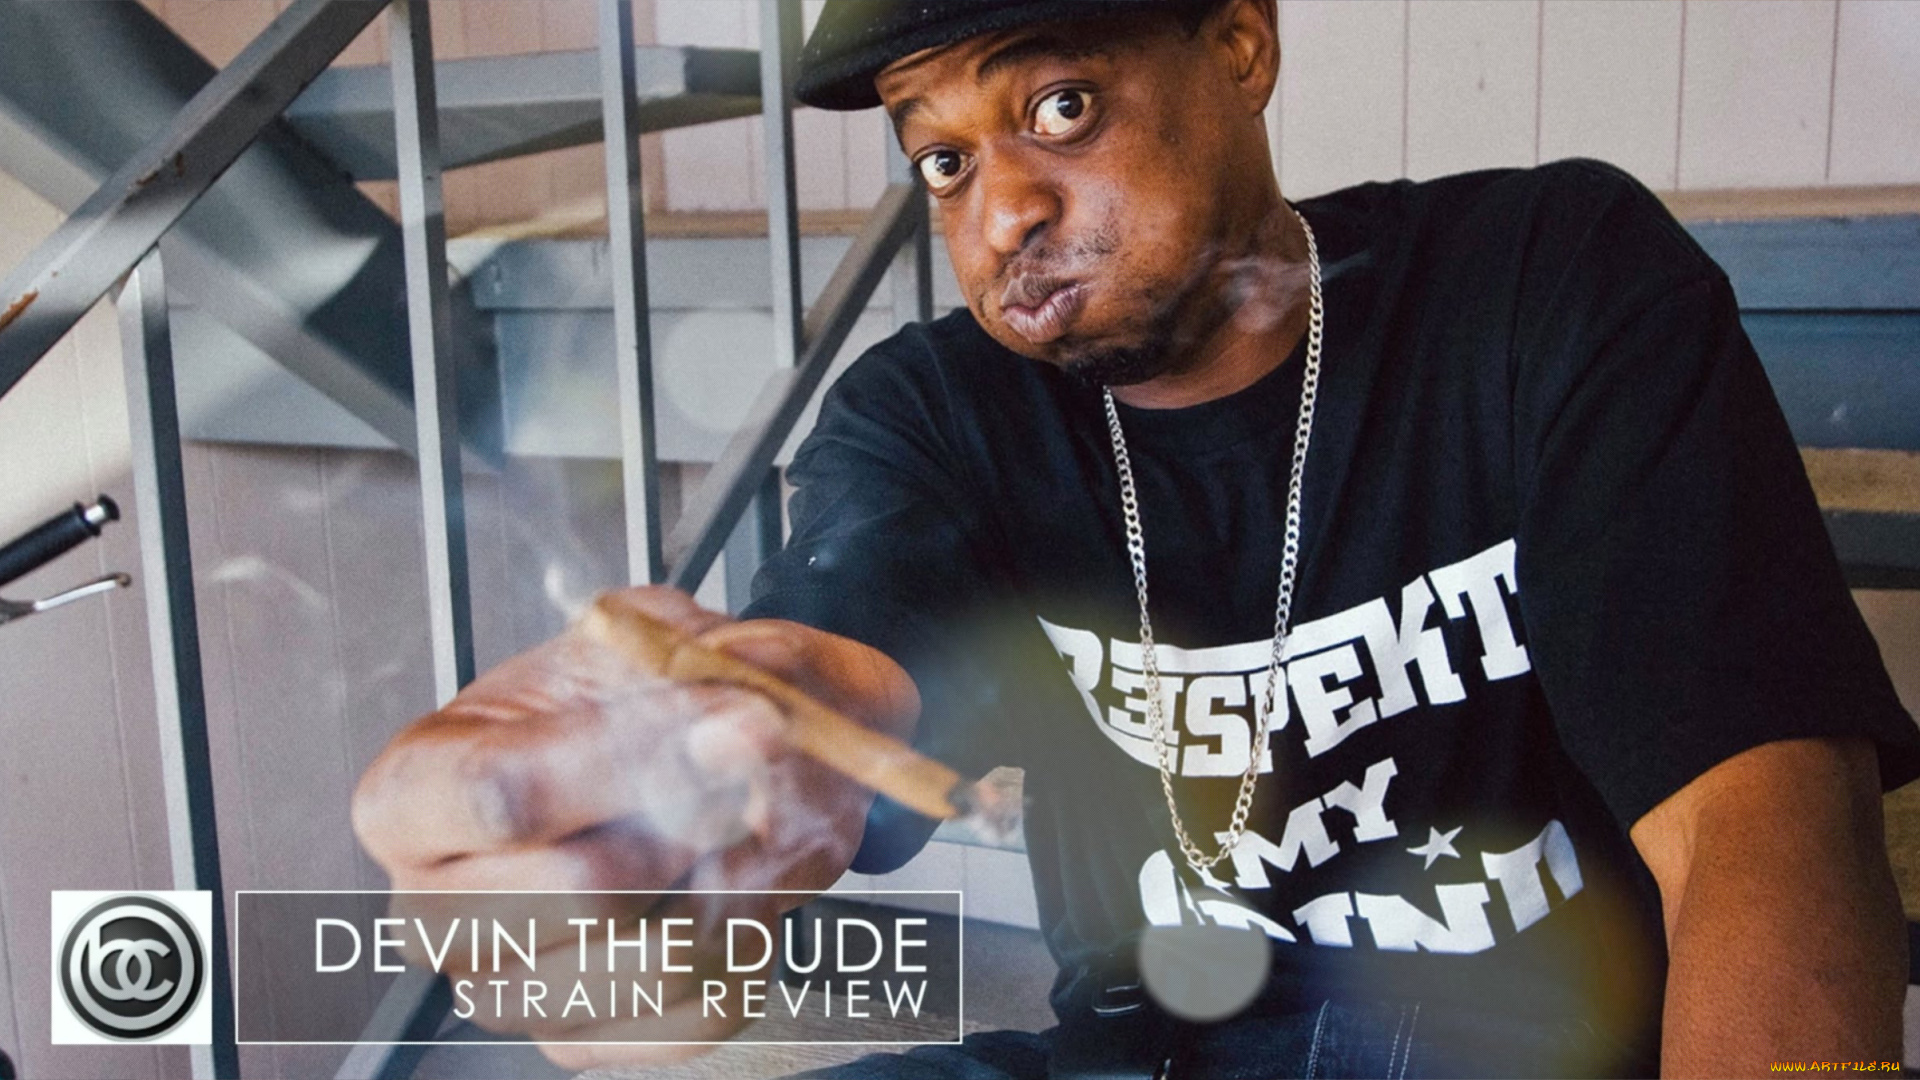 devin-the-dude-strain-review, музыка, devin, the, dude, музыкант